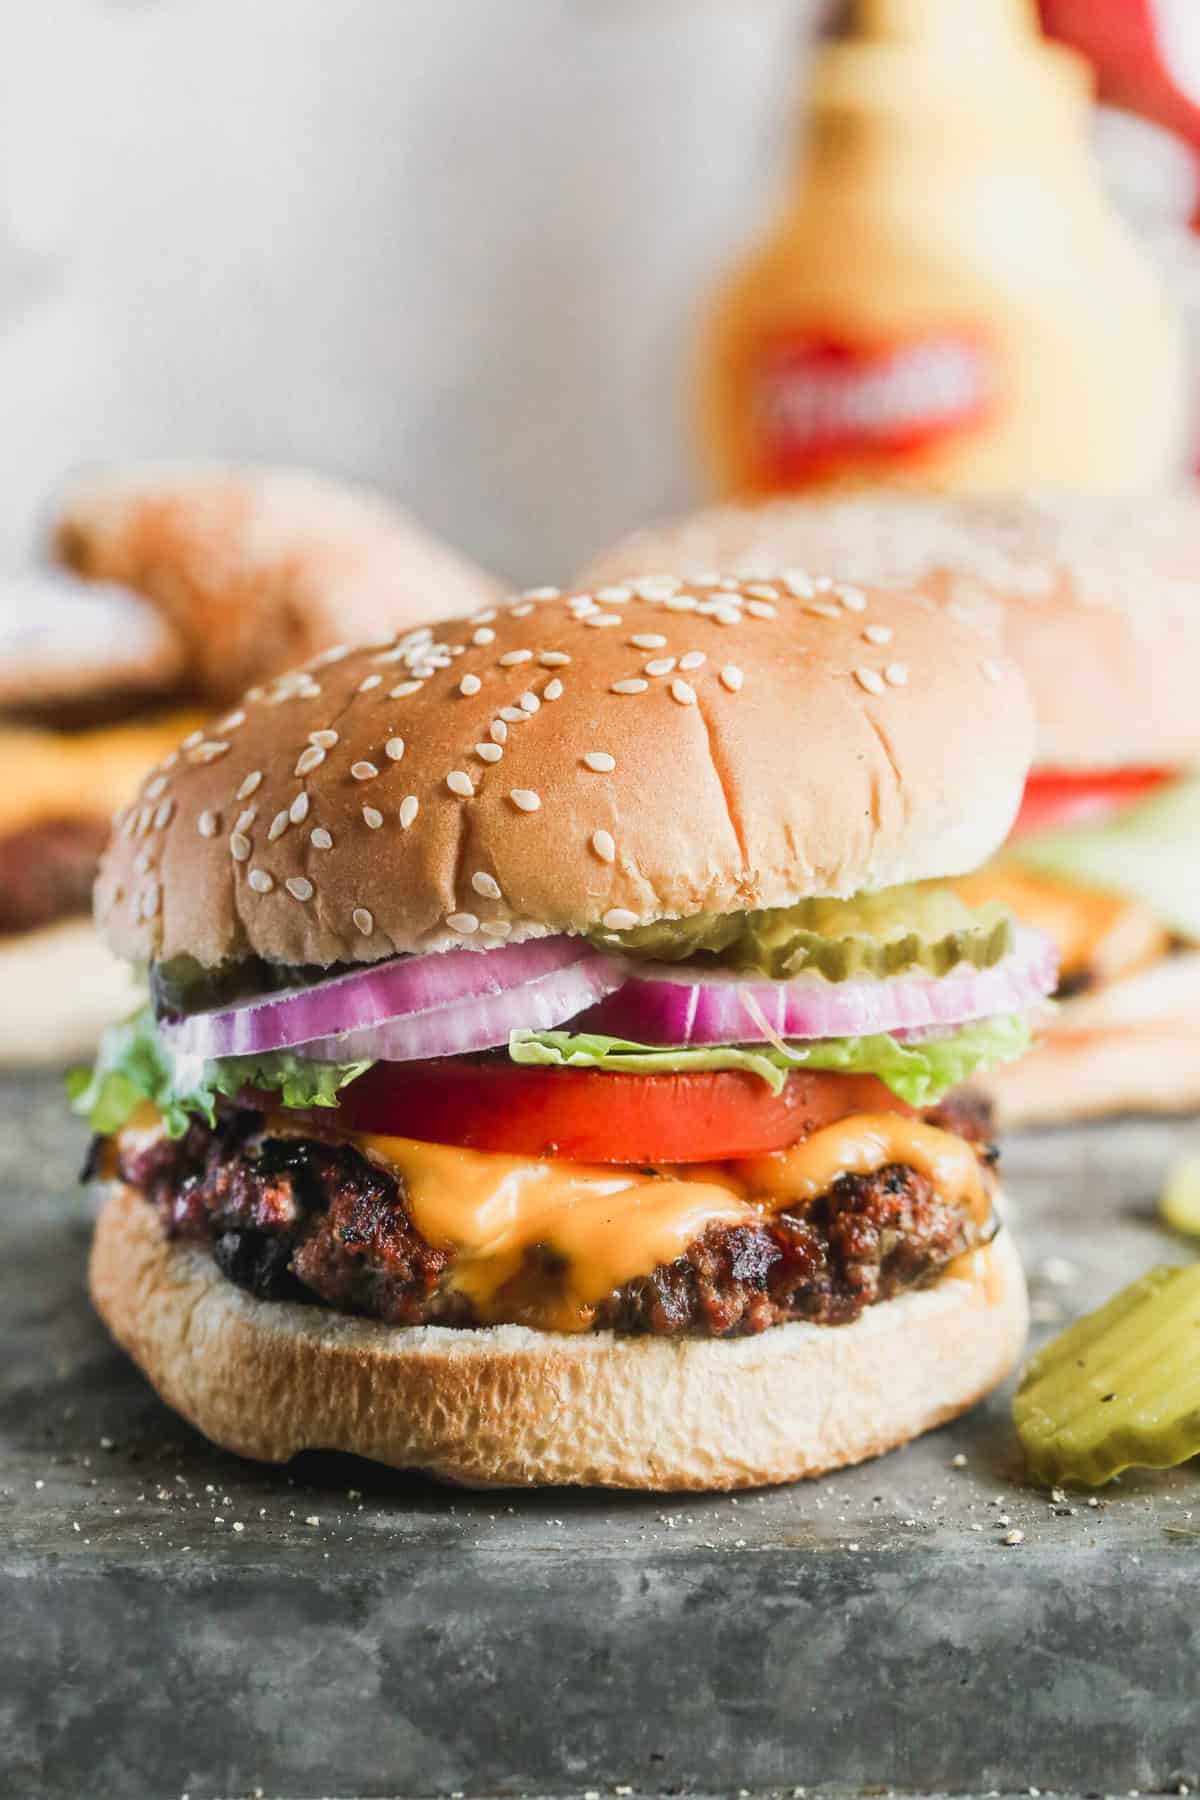 A juicy homemade hamburger recipe with cheese, lettuce, tomatoes, pickles, and red onions, ready to enjoy.